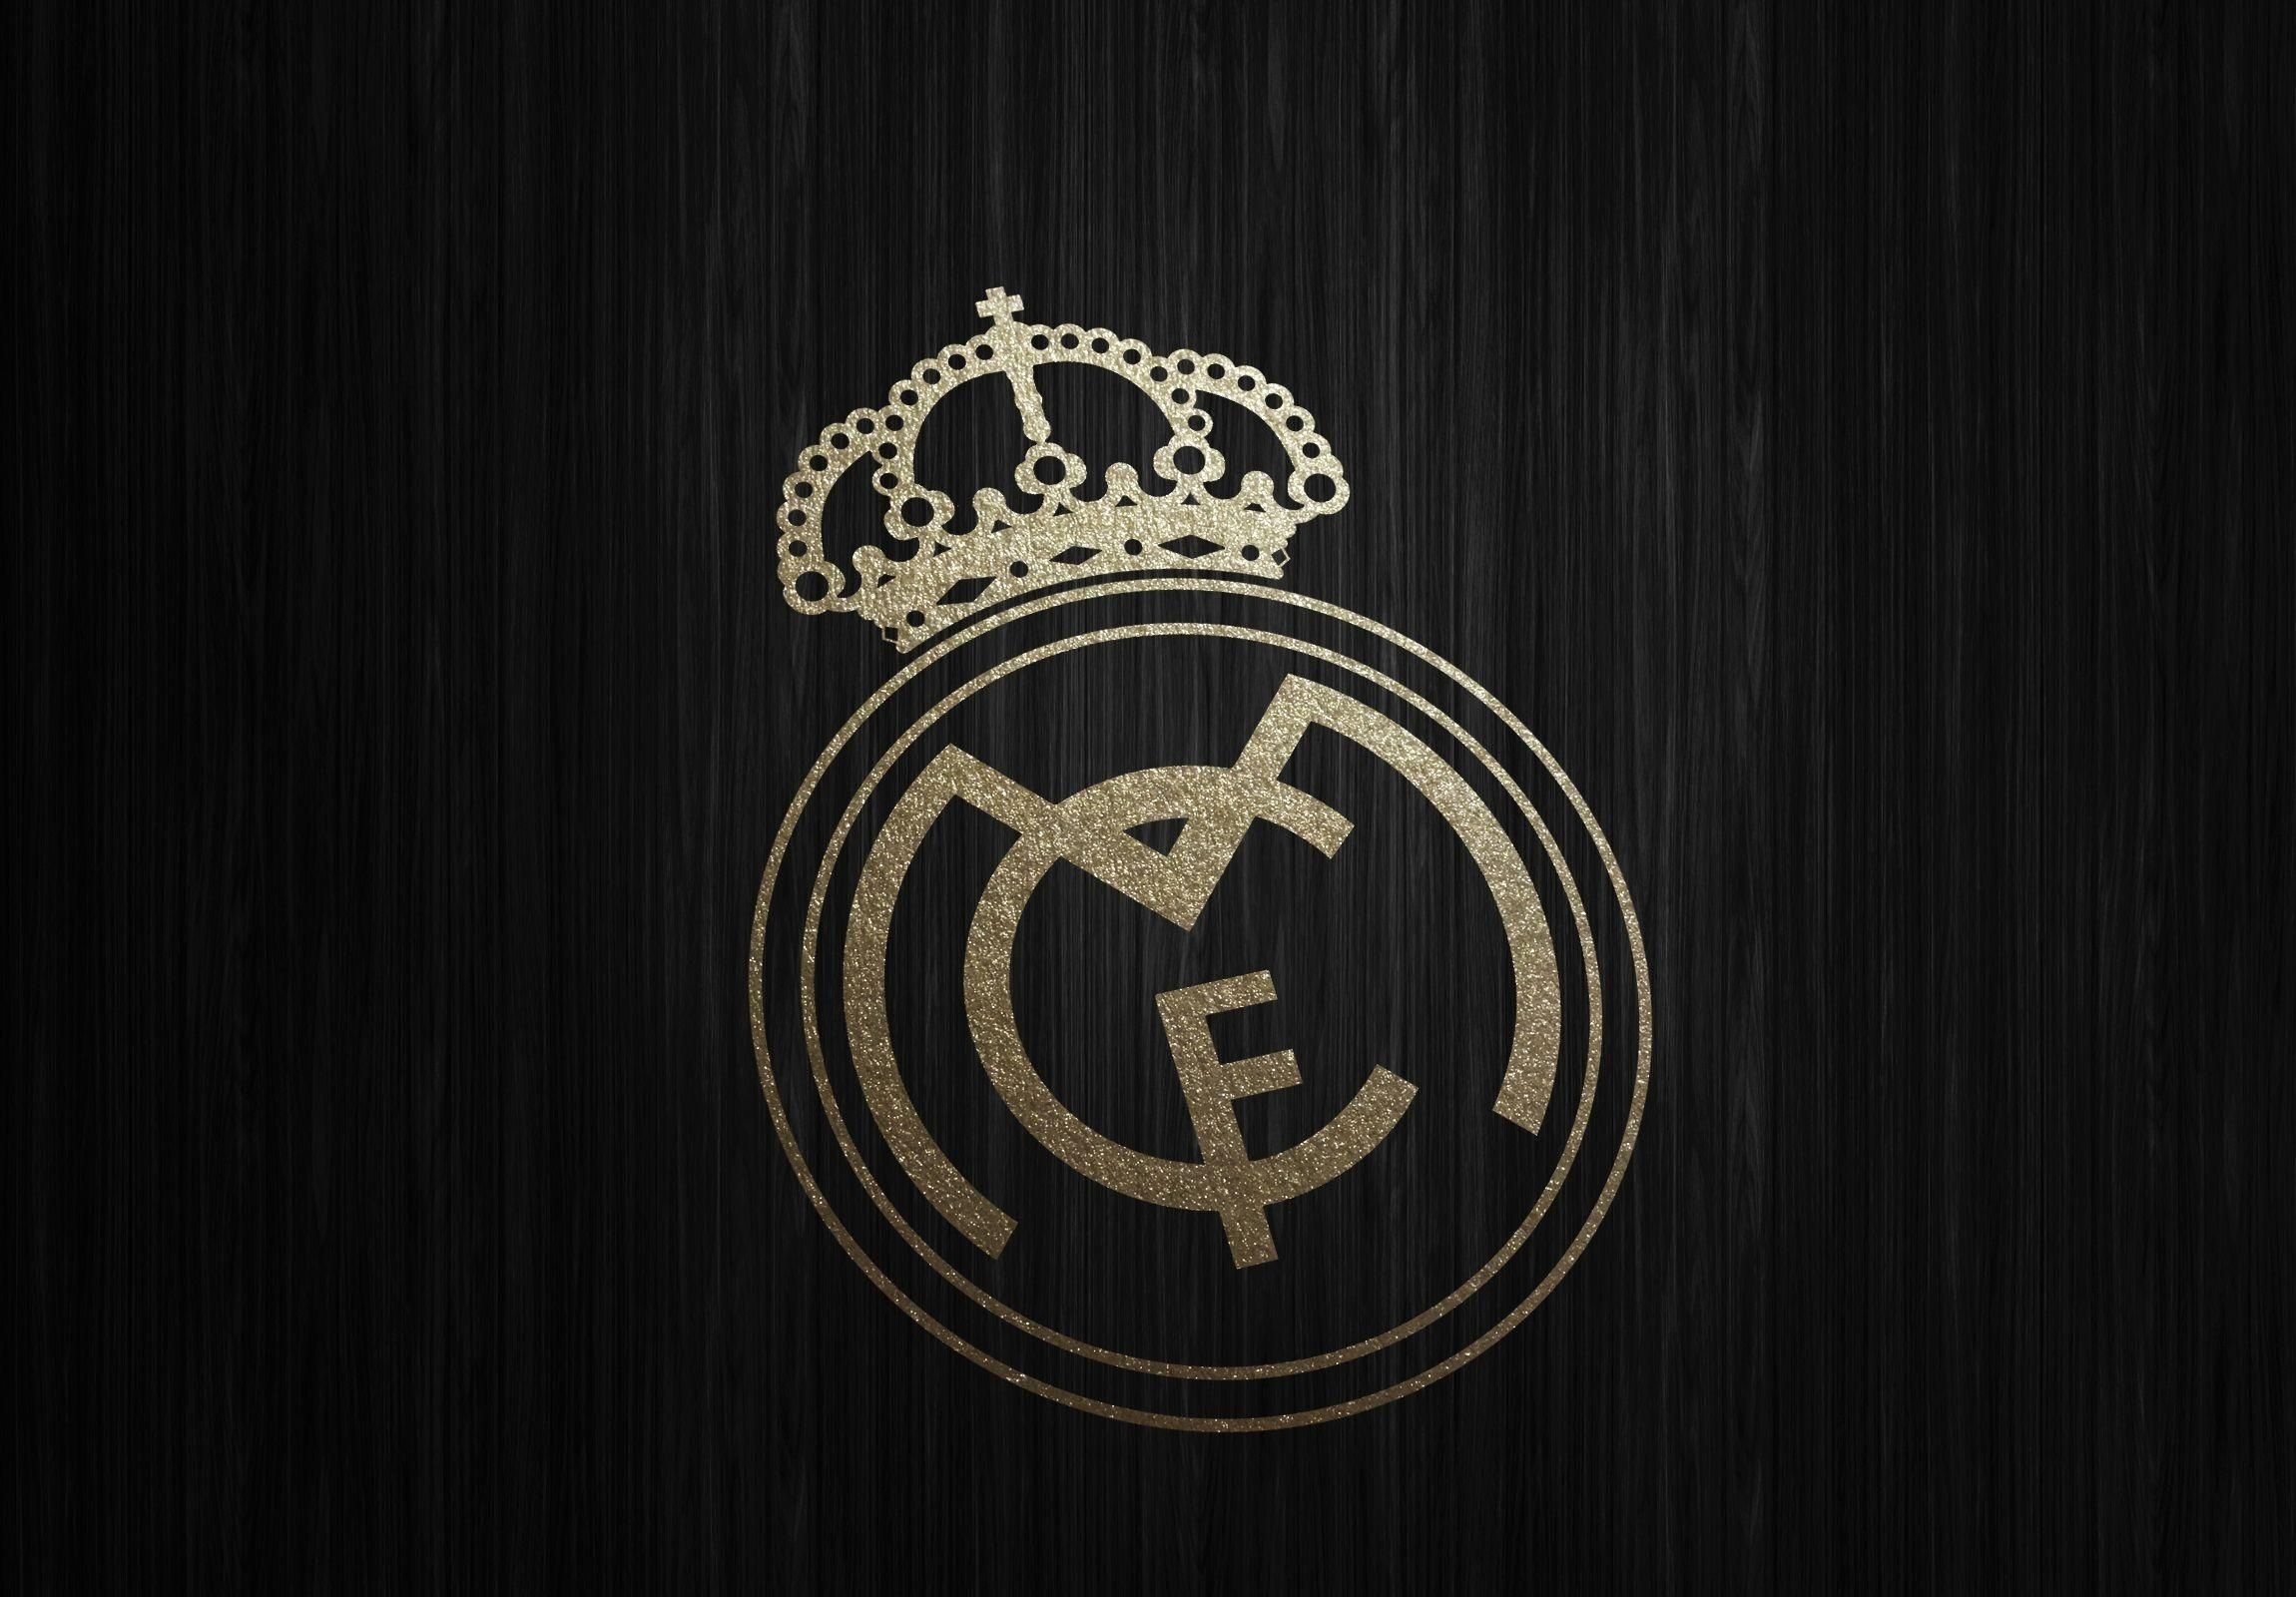 Top real madrid 1080p wallpaper 4k Download Book Source for free download HD, 4K & high quality wallpaper